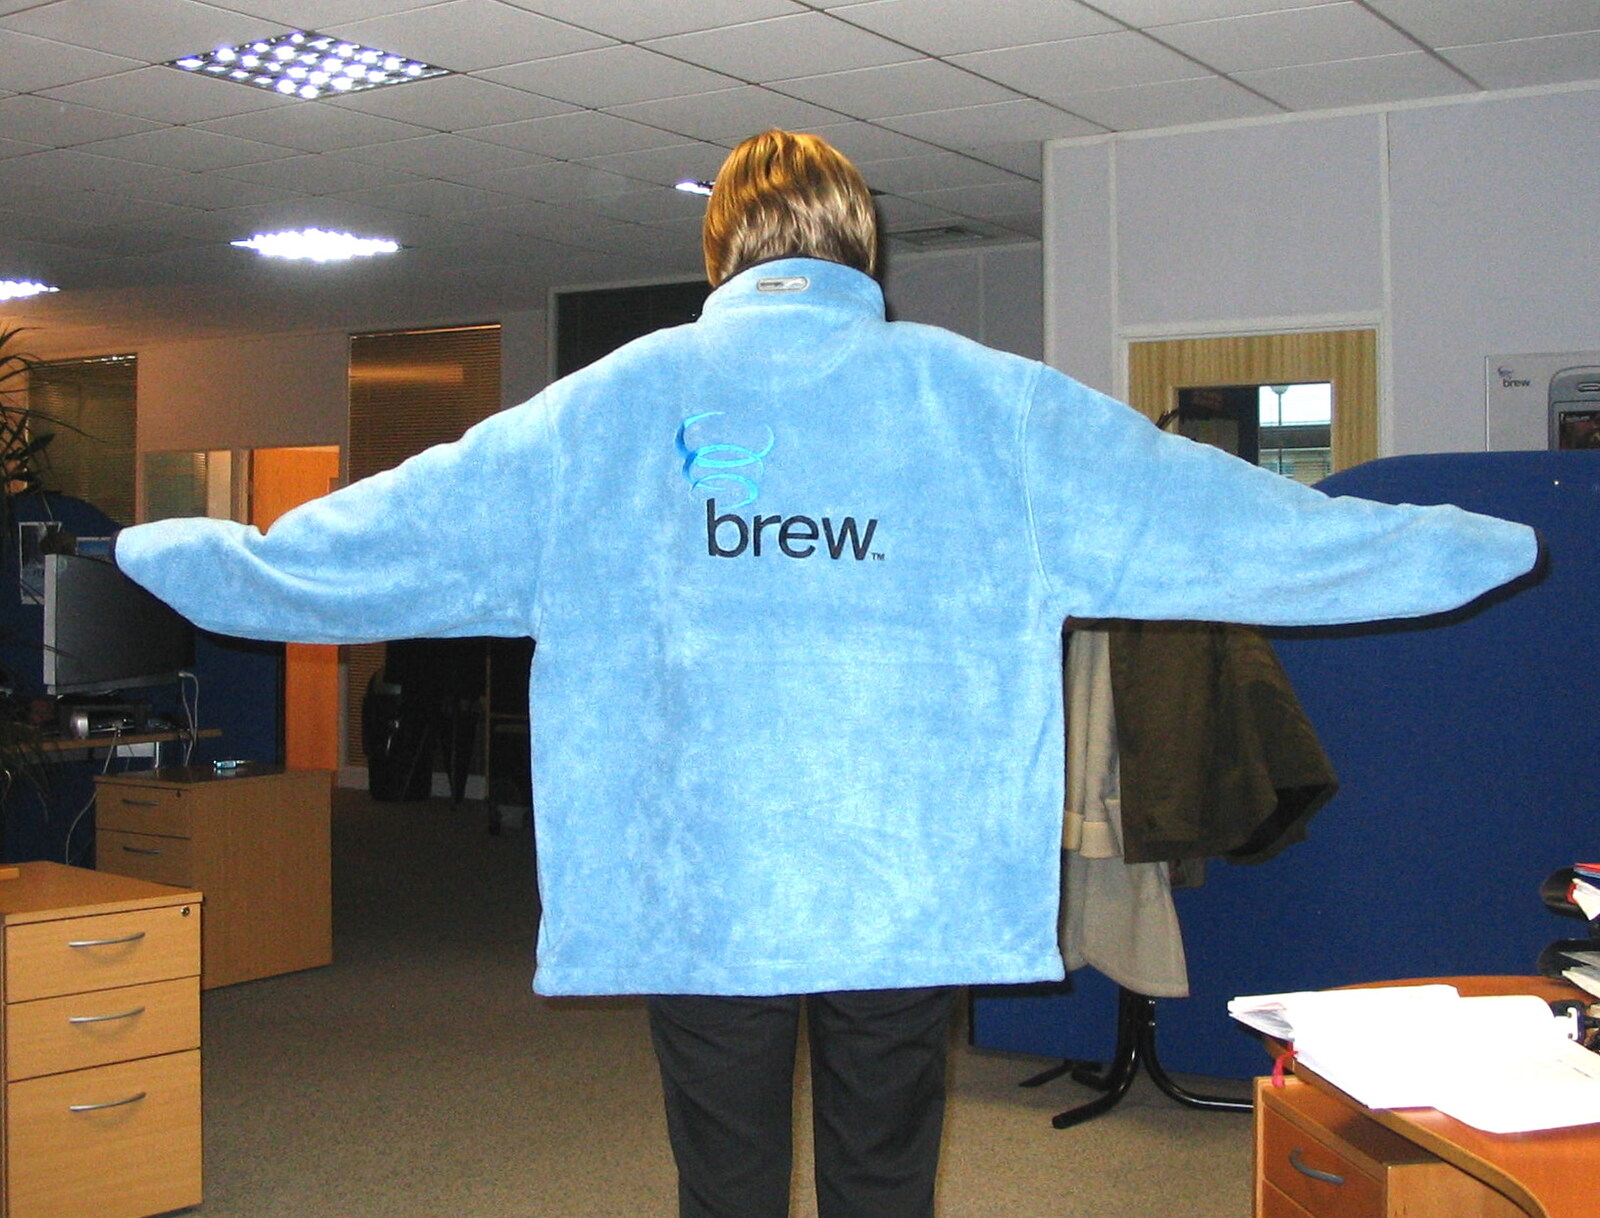 Lucy models a 'BREW' fleece from A Swan Car Crash and the End of Trigenix, Brome and Cambridge - 31st January 2005